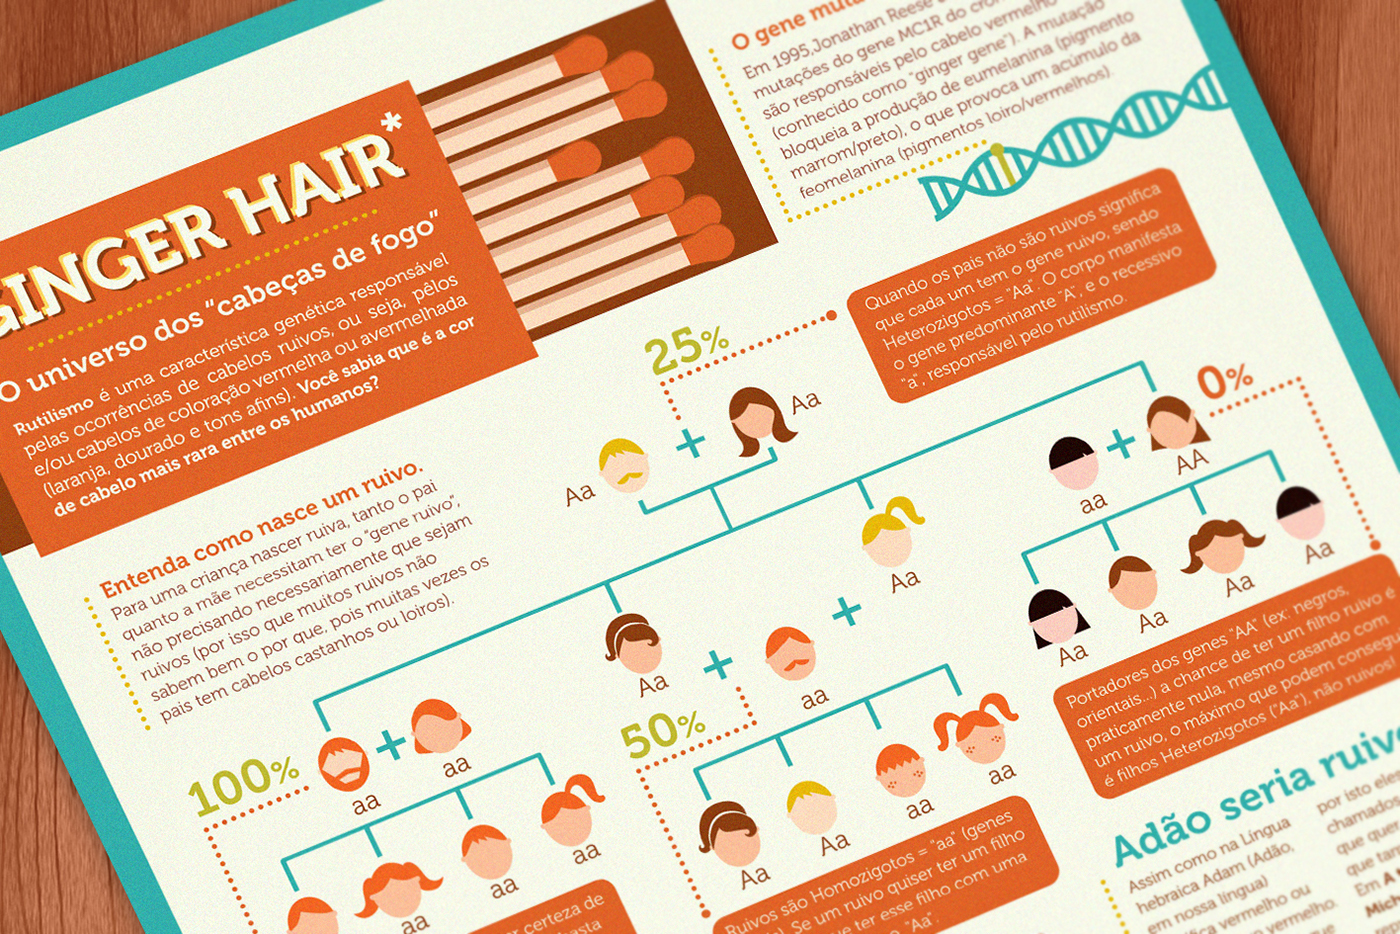 infographic infográfico Icones icons ruivos   ginger hair dados color Layout pattern graphics detail arts personal project creative red cabelo Cores